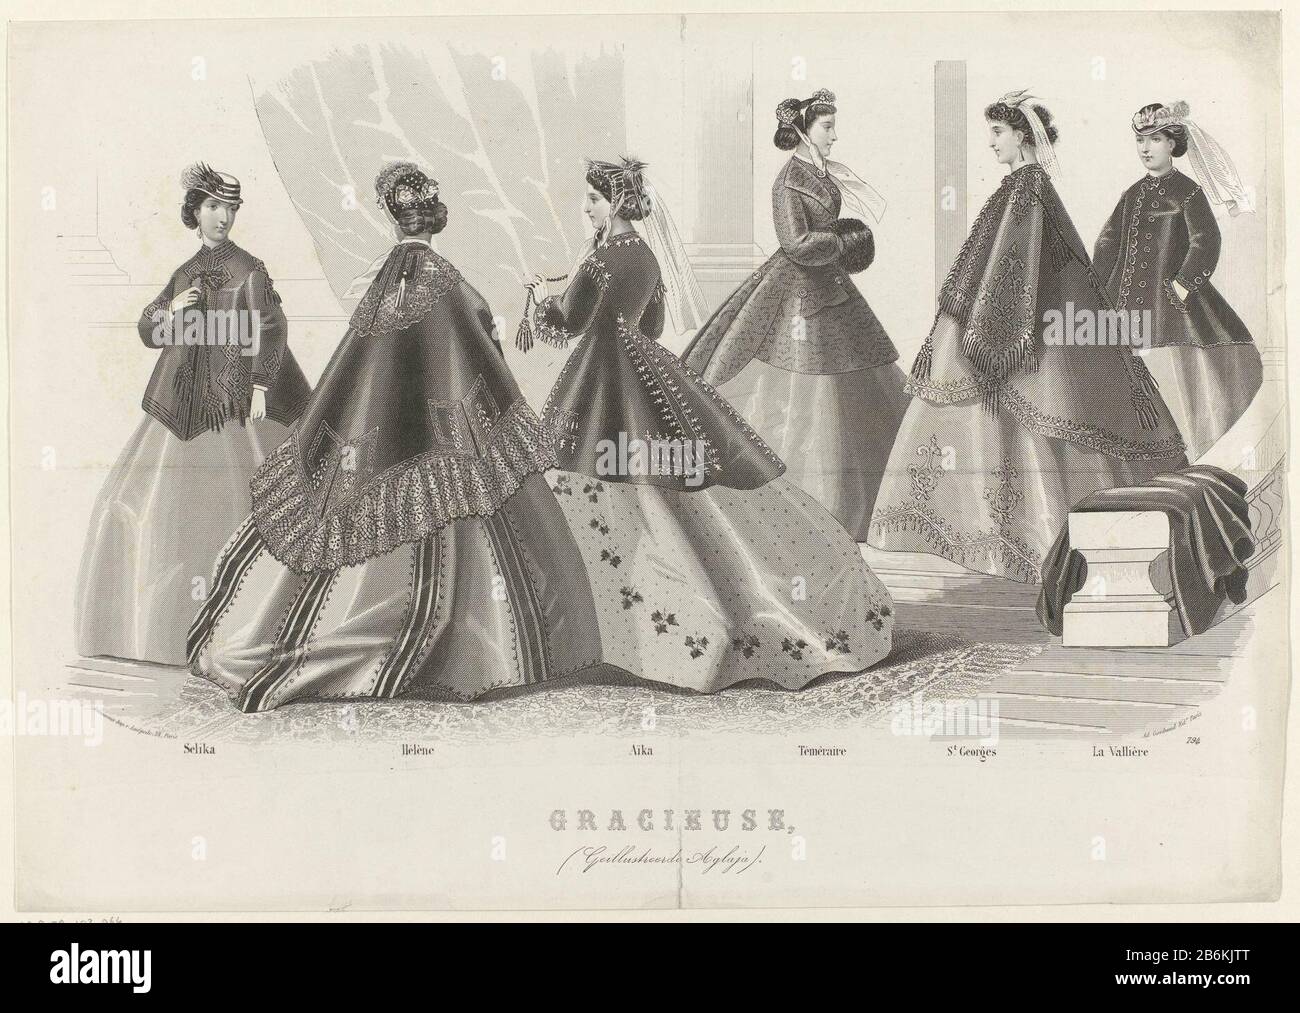 An explosion of fashion magazine income Gracieuse, Illustrated Aglaja, approximately 1865-'66, No. 794 Object Type : fashion picture Item number: RP-P-OB-103.064 Inscriptions / Brands: signature, bottom center, engraved 'Selika / Helene / Aïka / Téméraire / St Georges / La Vallière'titel, bottom center, engraved' GRACIEUSE / ( illustrated Aglaja) 'Description: Postcard from the fashion magazine De Gracieuse (1865-1936), taken from. Illustrée La mode' of the Parisian publisher Goubaud. The names of the dresses: Selika / Hélène / Aïka / Téméraire / St Georges / La Vallière Manufacturer : printma Stock Photo